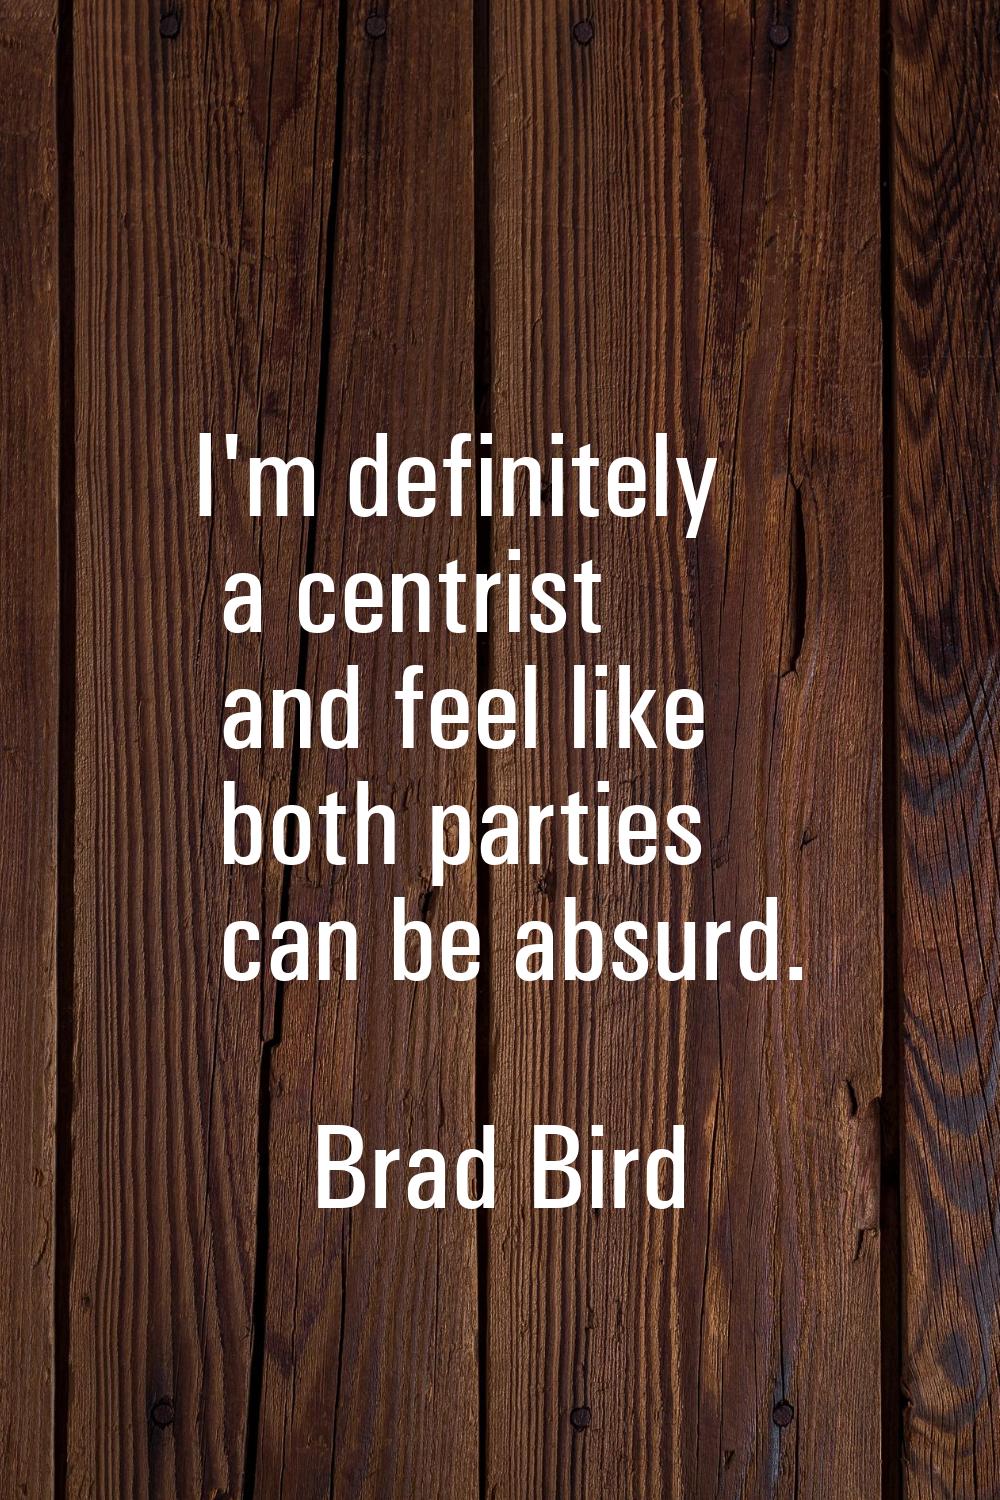 I'm definitely a centrist and feel like both parties can be absurd.